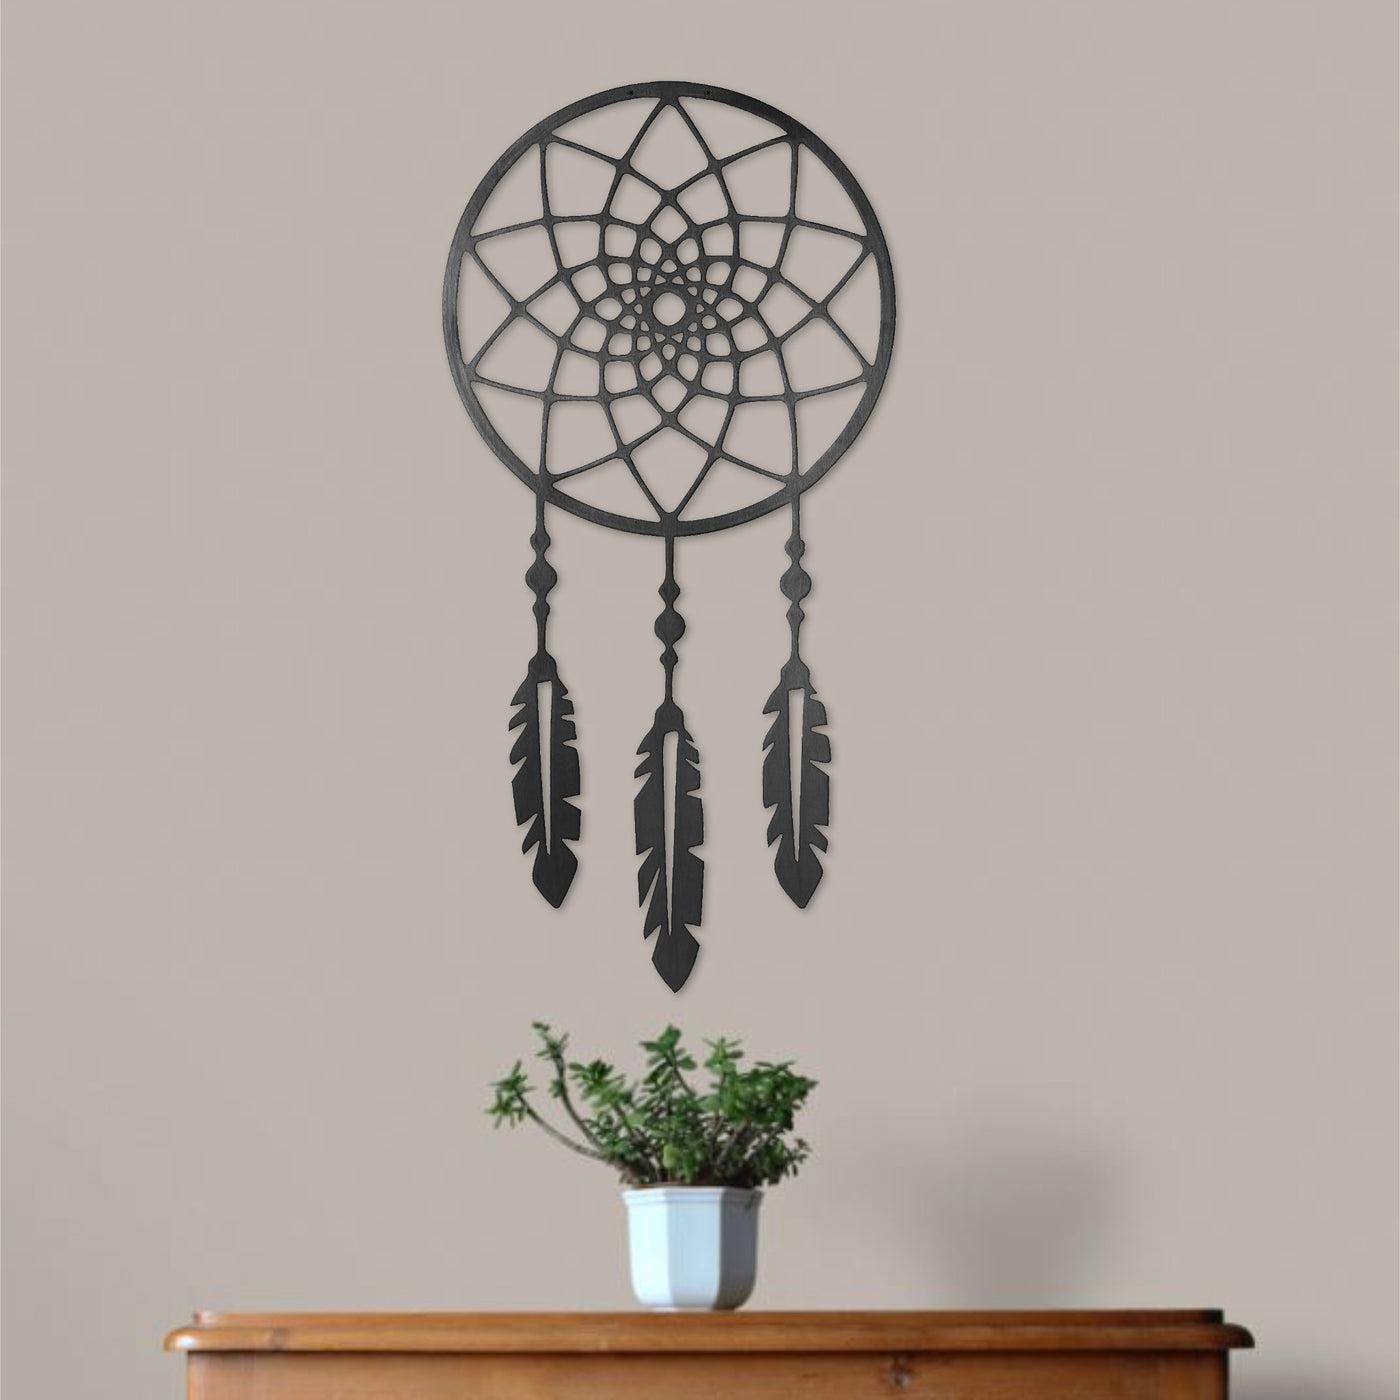 Dreamcatcher Metal Wall Art - The Stainless Community